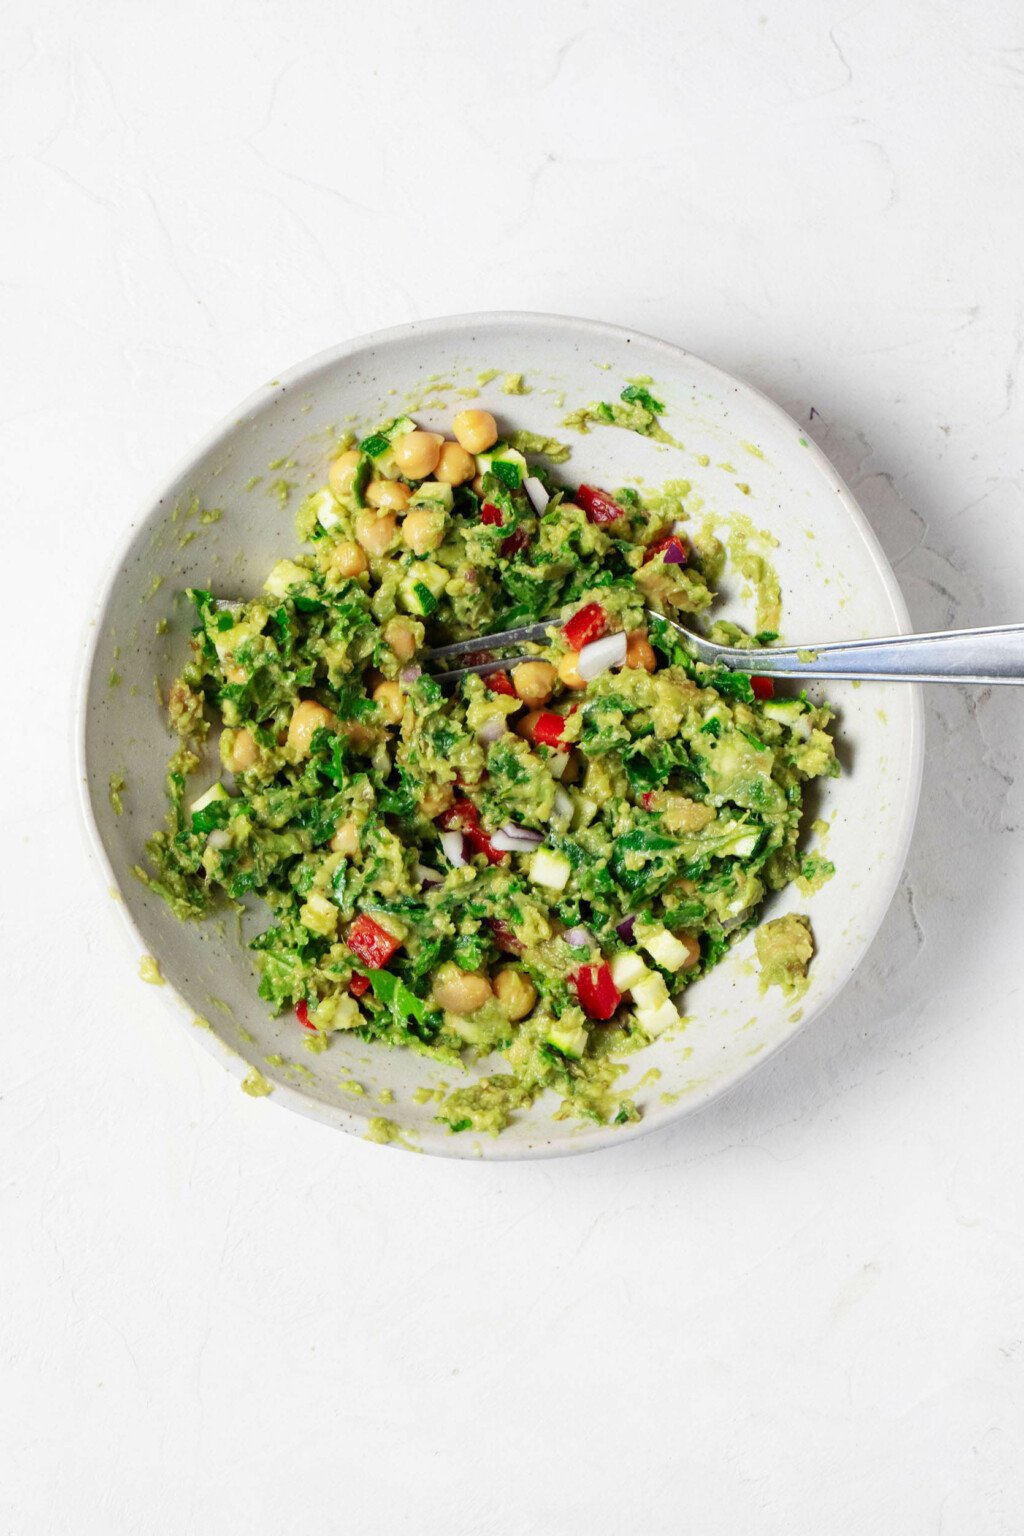 An overhead image of a bowl of guacamole that has been made more colorful with the addition of various chopped vegetables and chickpeas.